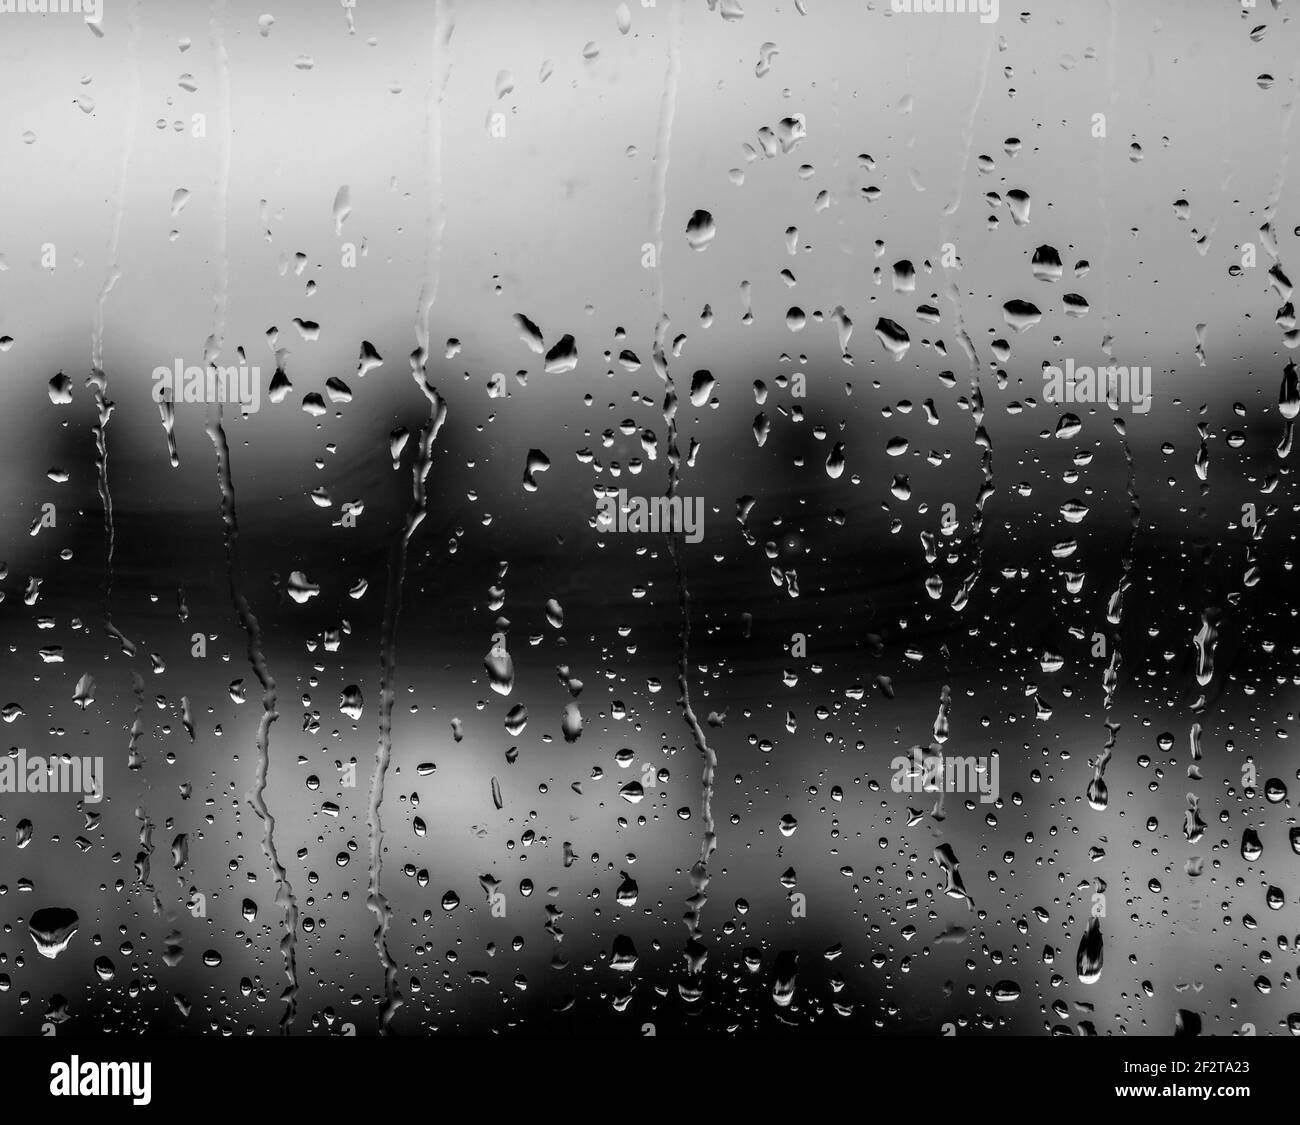 Monochrome image of Raindrops on window with the soft focus hillside terrace of suburban housing beyond Stock Photo